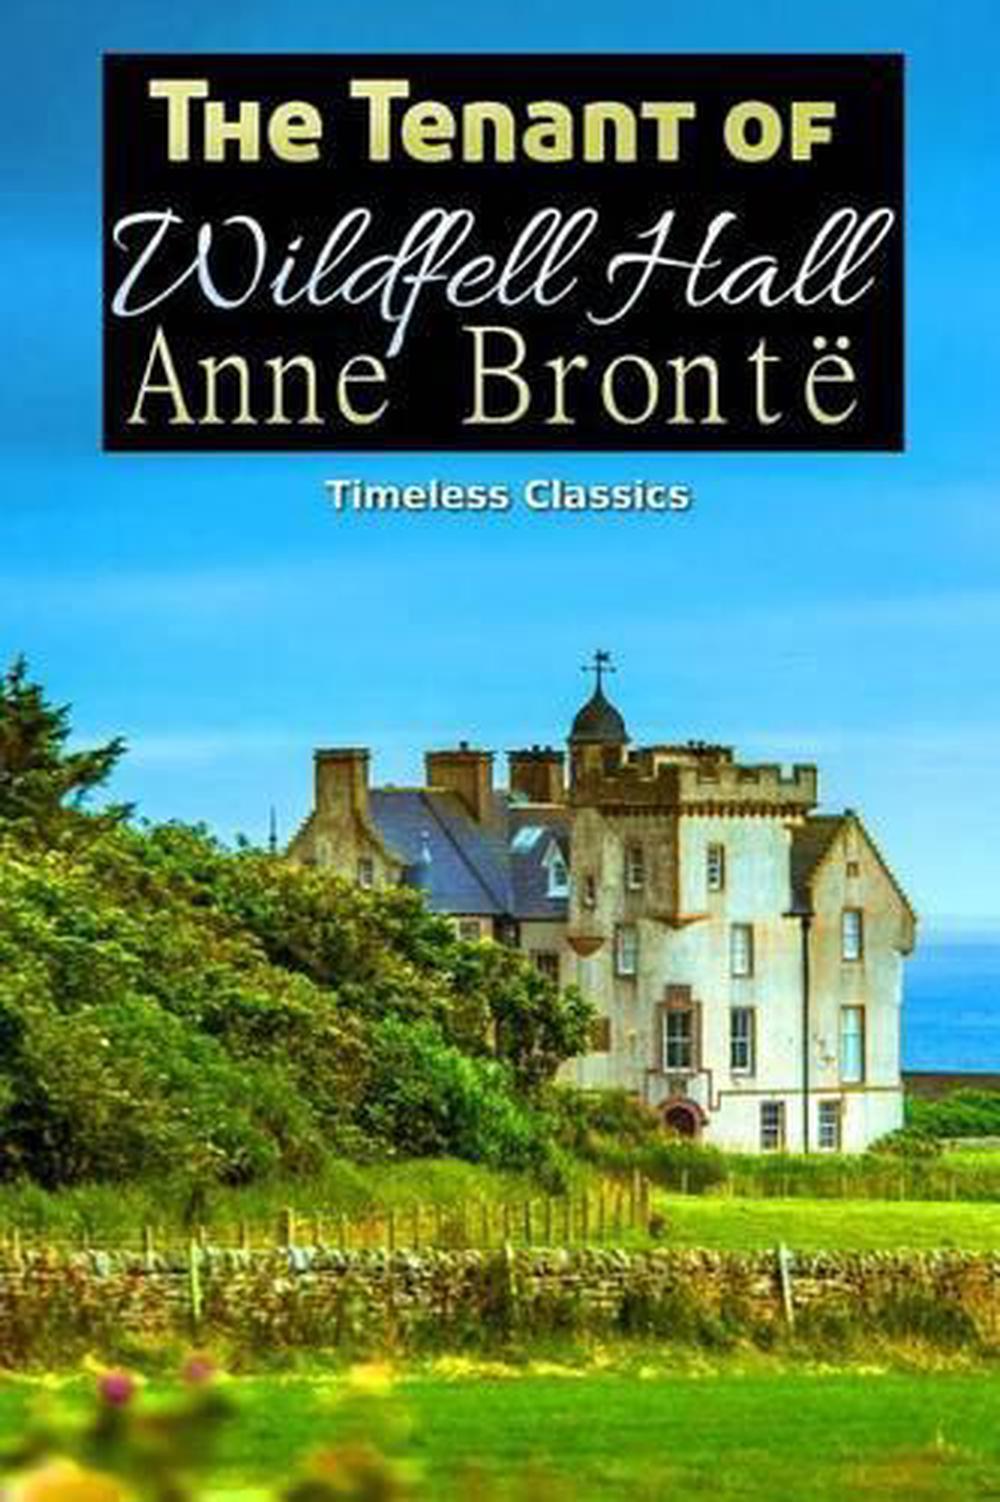 The Tenant Of Wildfell Hall by Anne Brontë